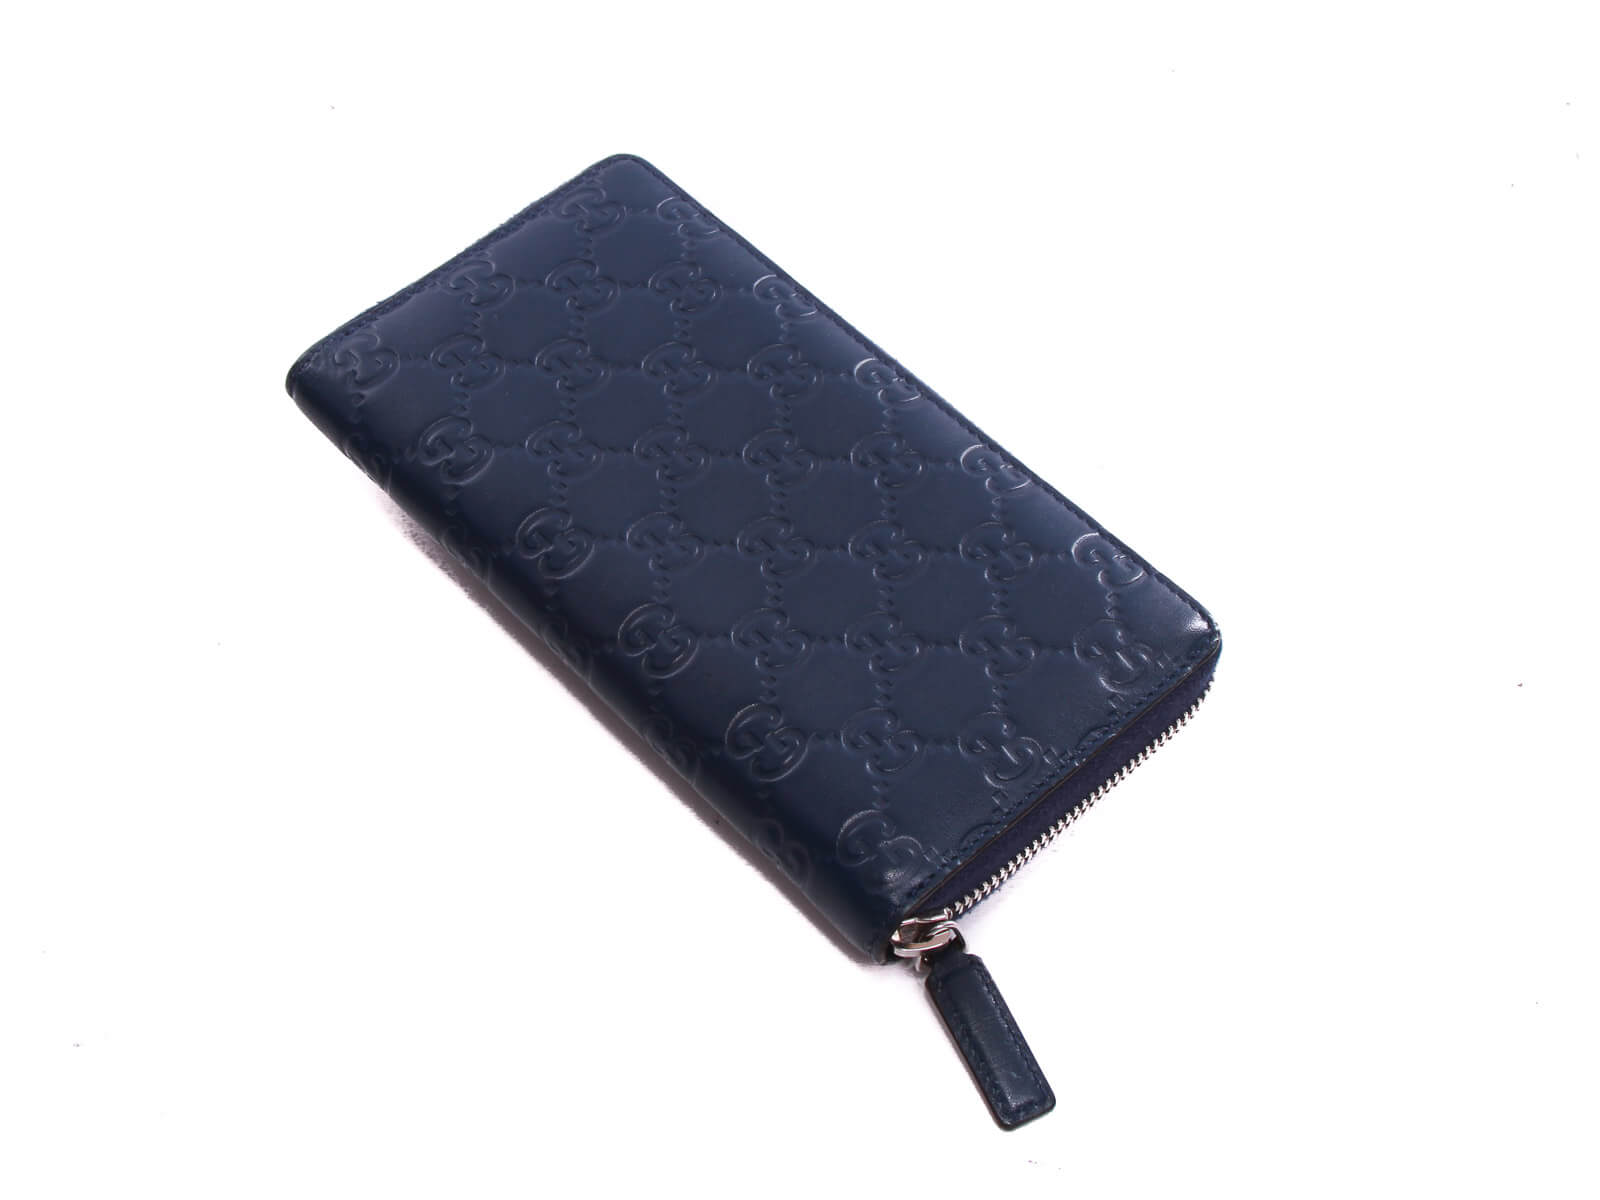 Authentic Gucci Guccissima NY Yankees Zip Around Wallet Blue